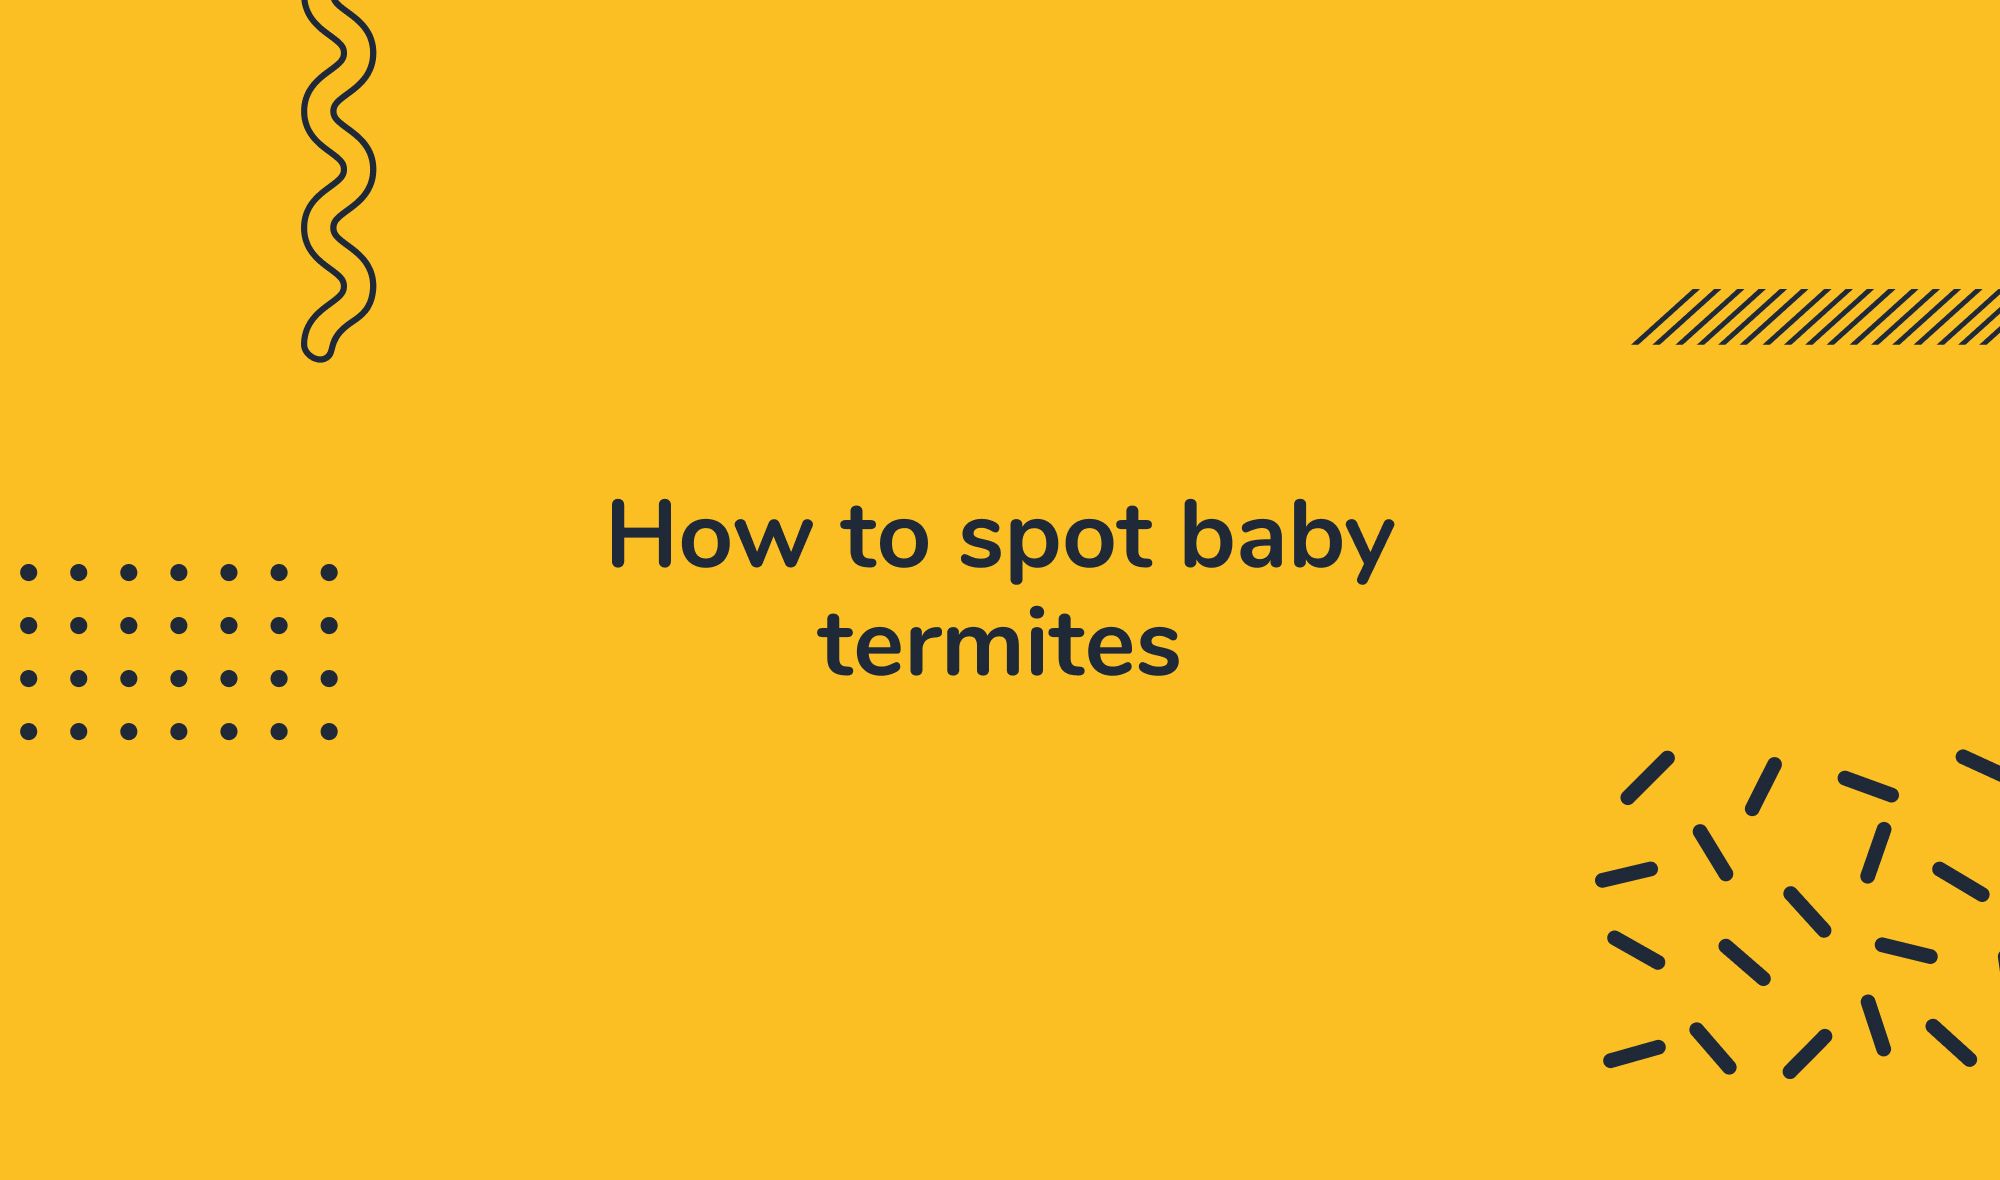 How to spot baby termites